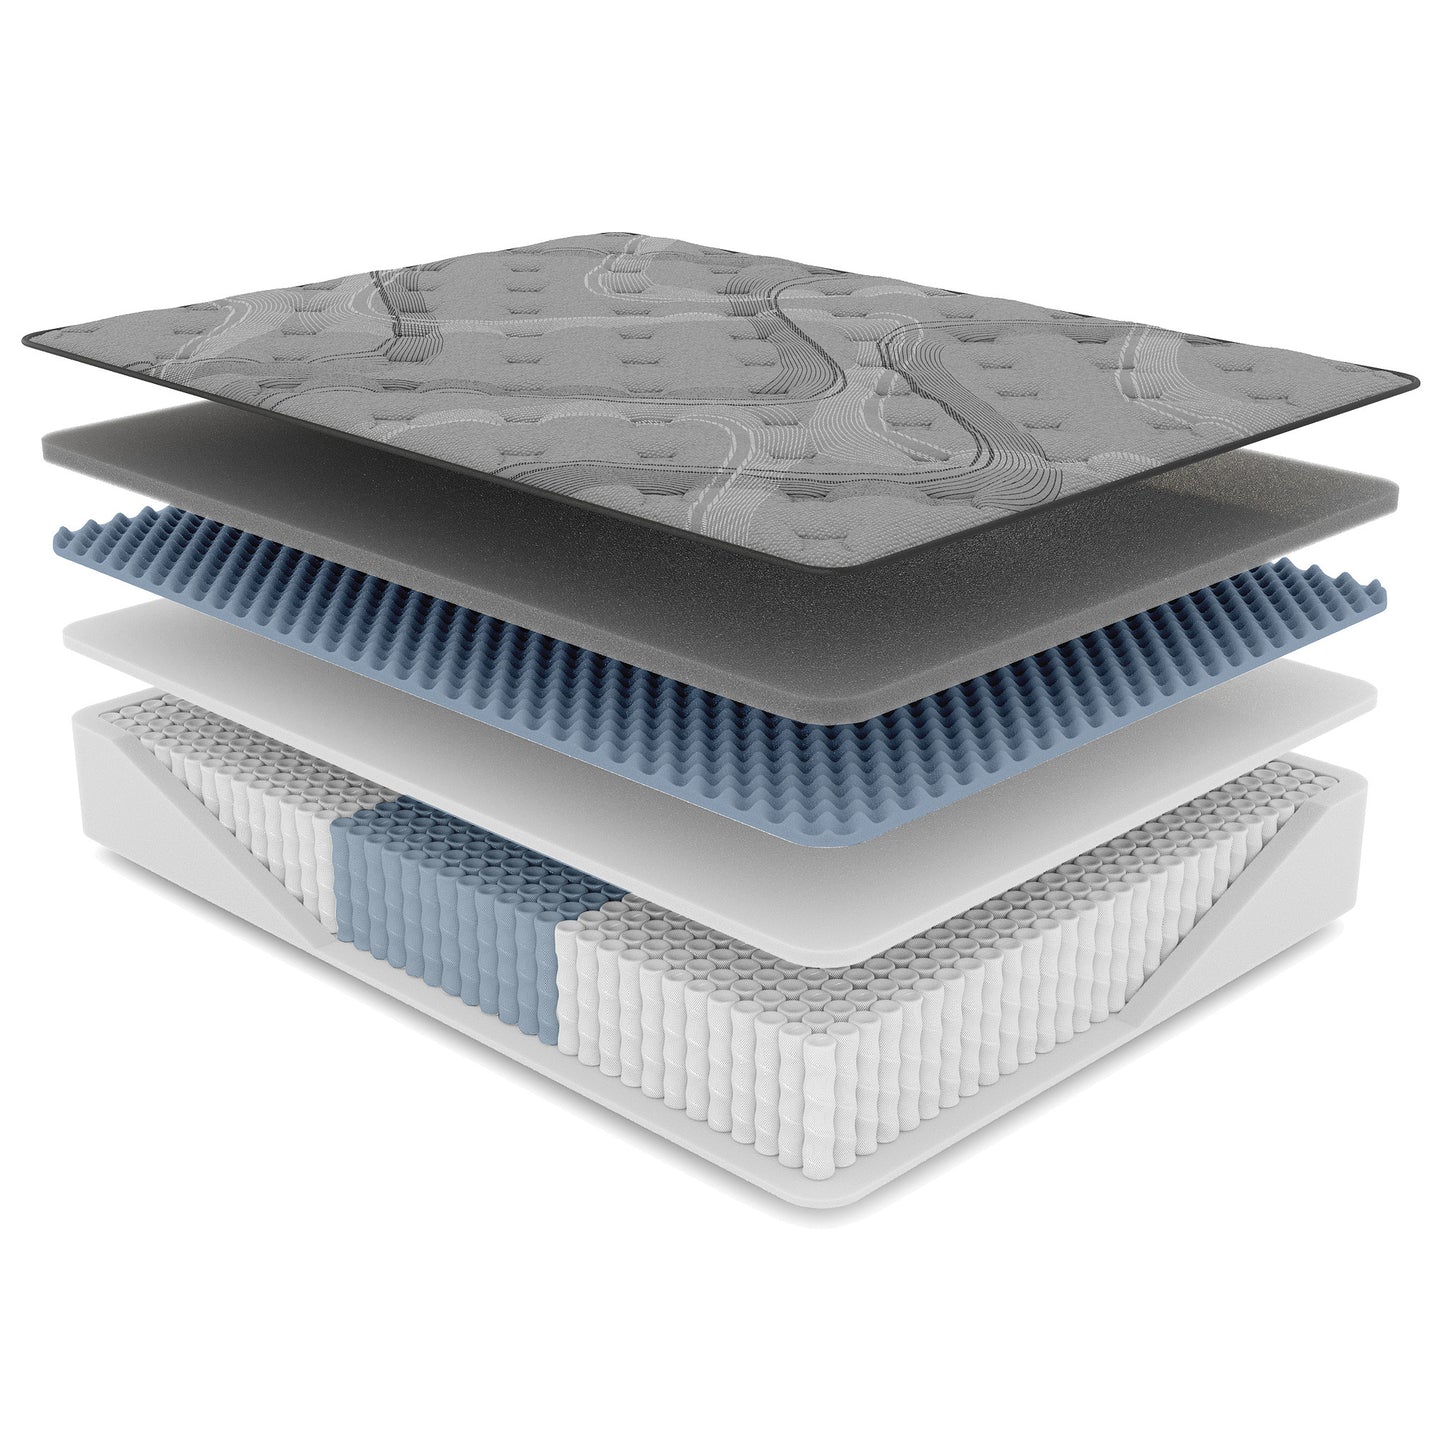 Graphene Cool Hybrid Euro-Top 14.5" Firm Mattress (Compare to Nolah™)